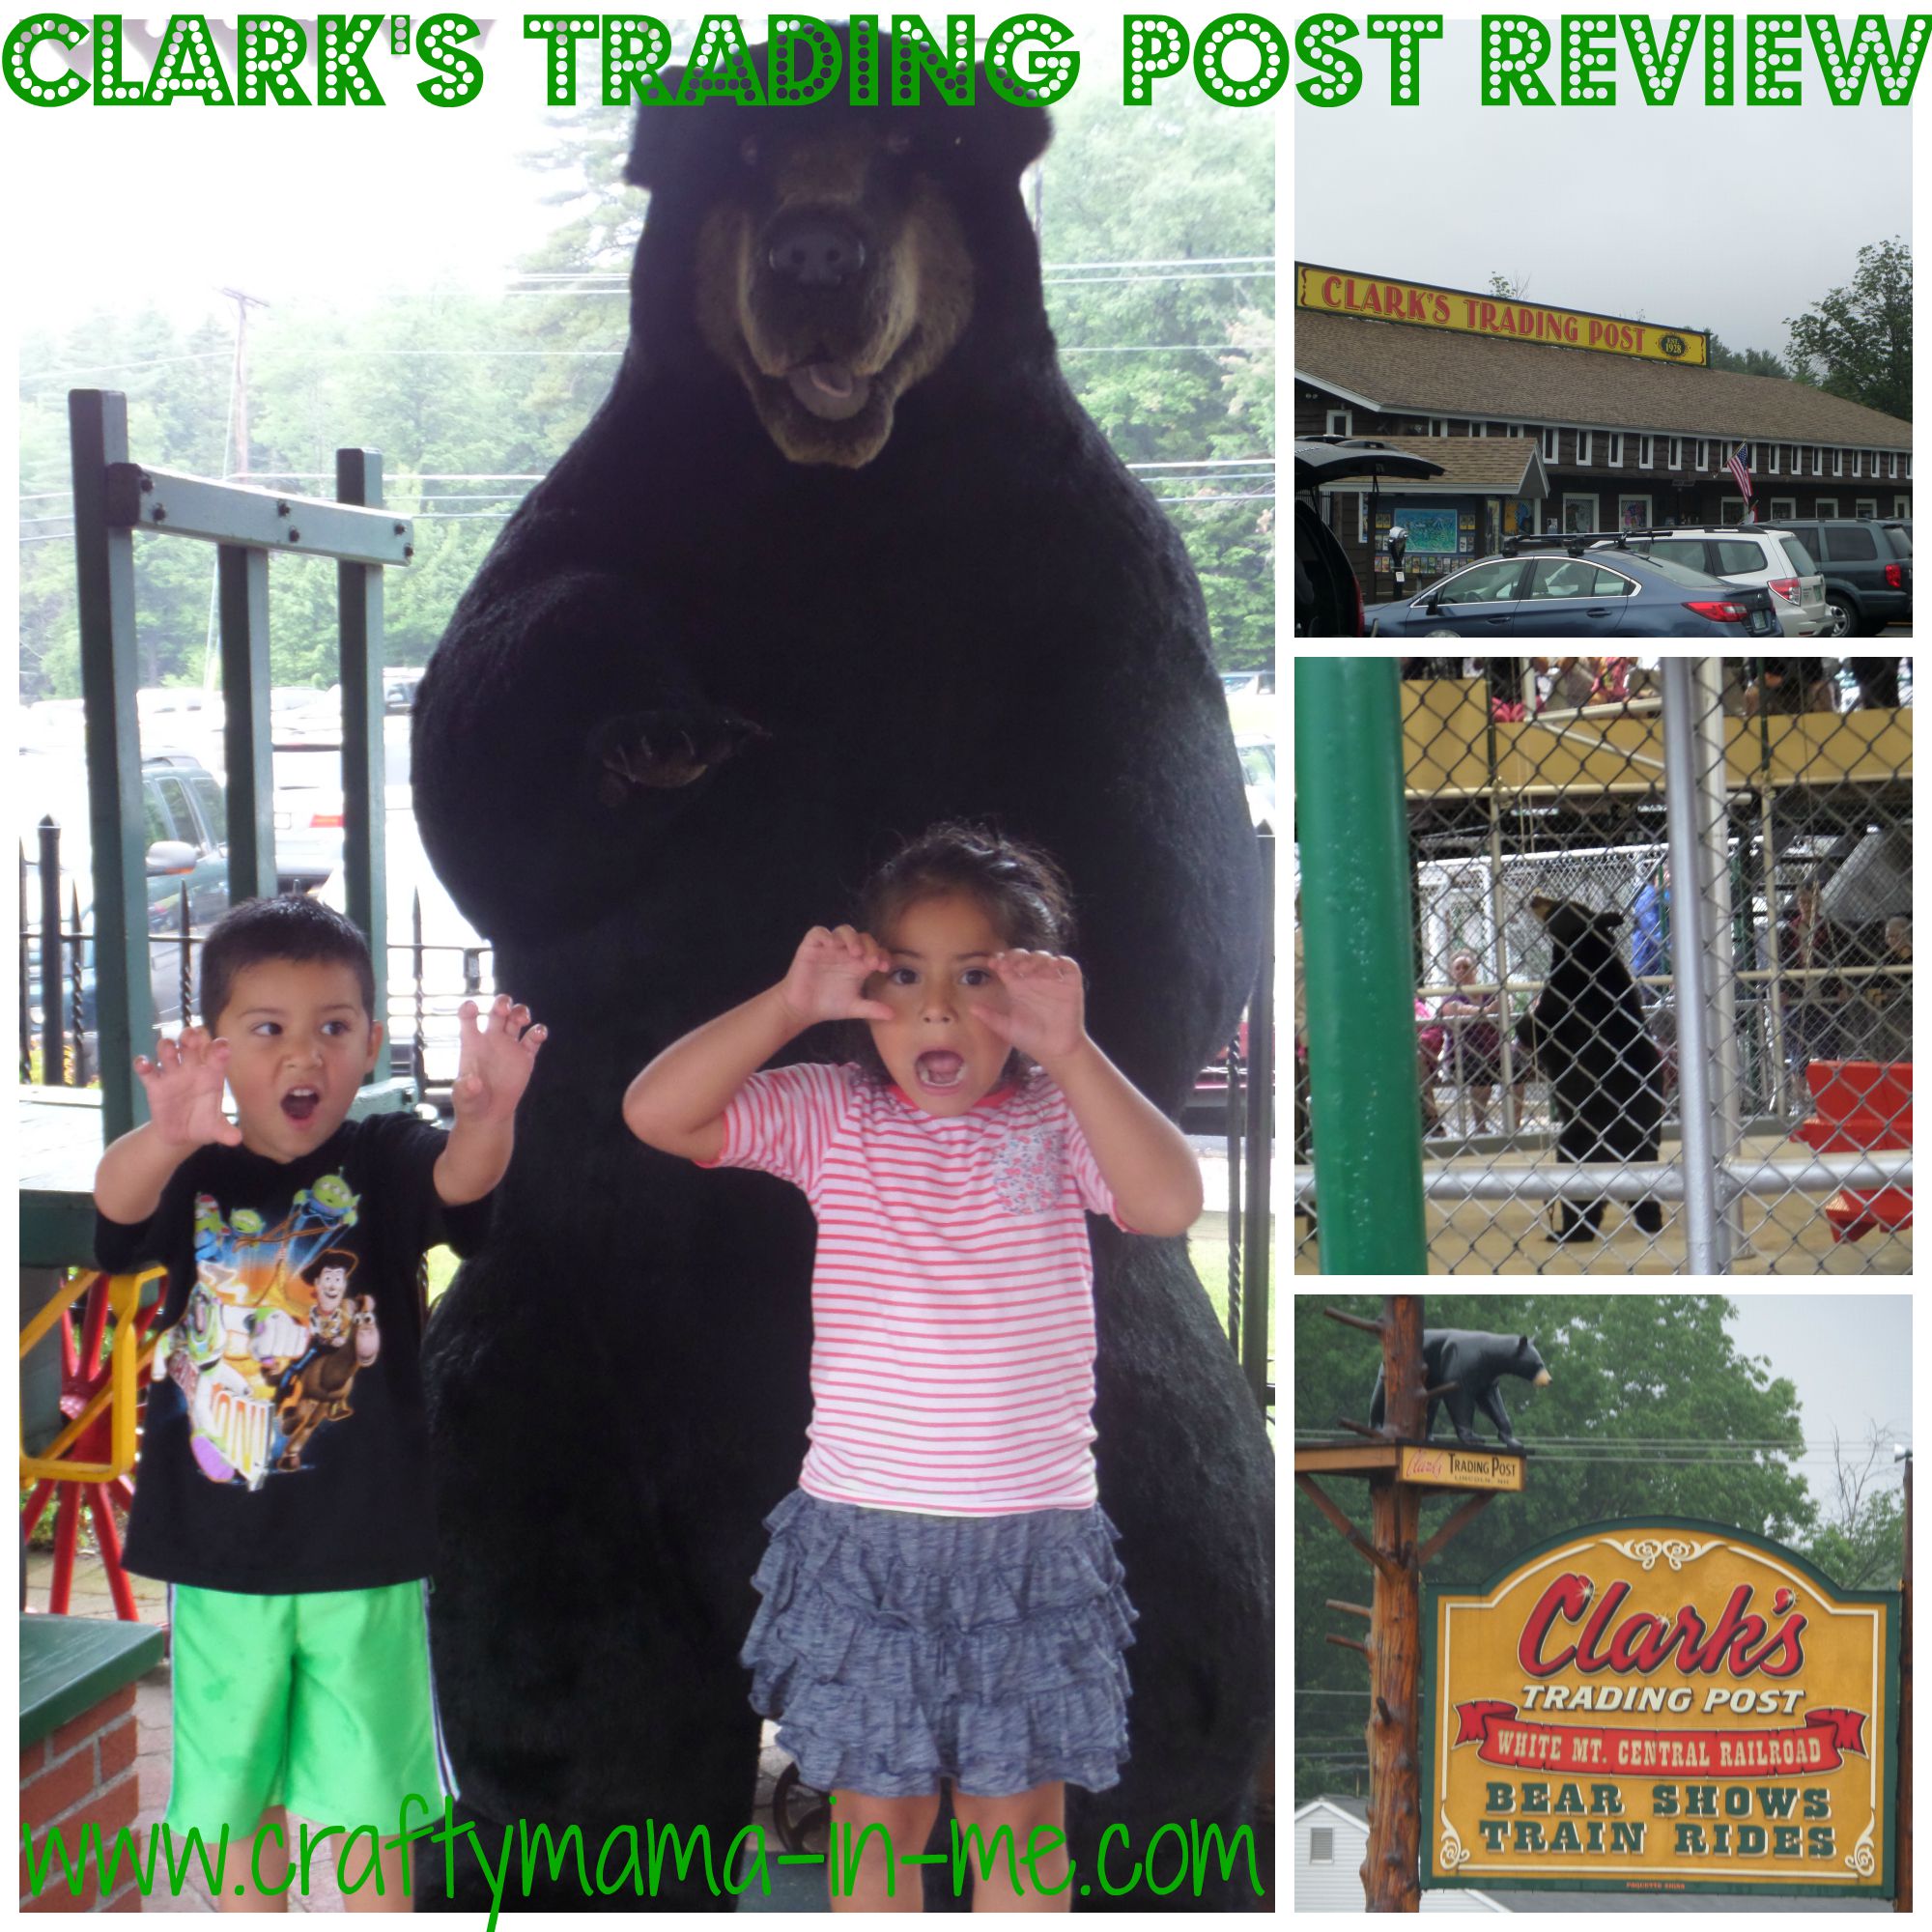 clarks trading post tickets